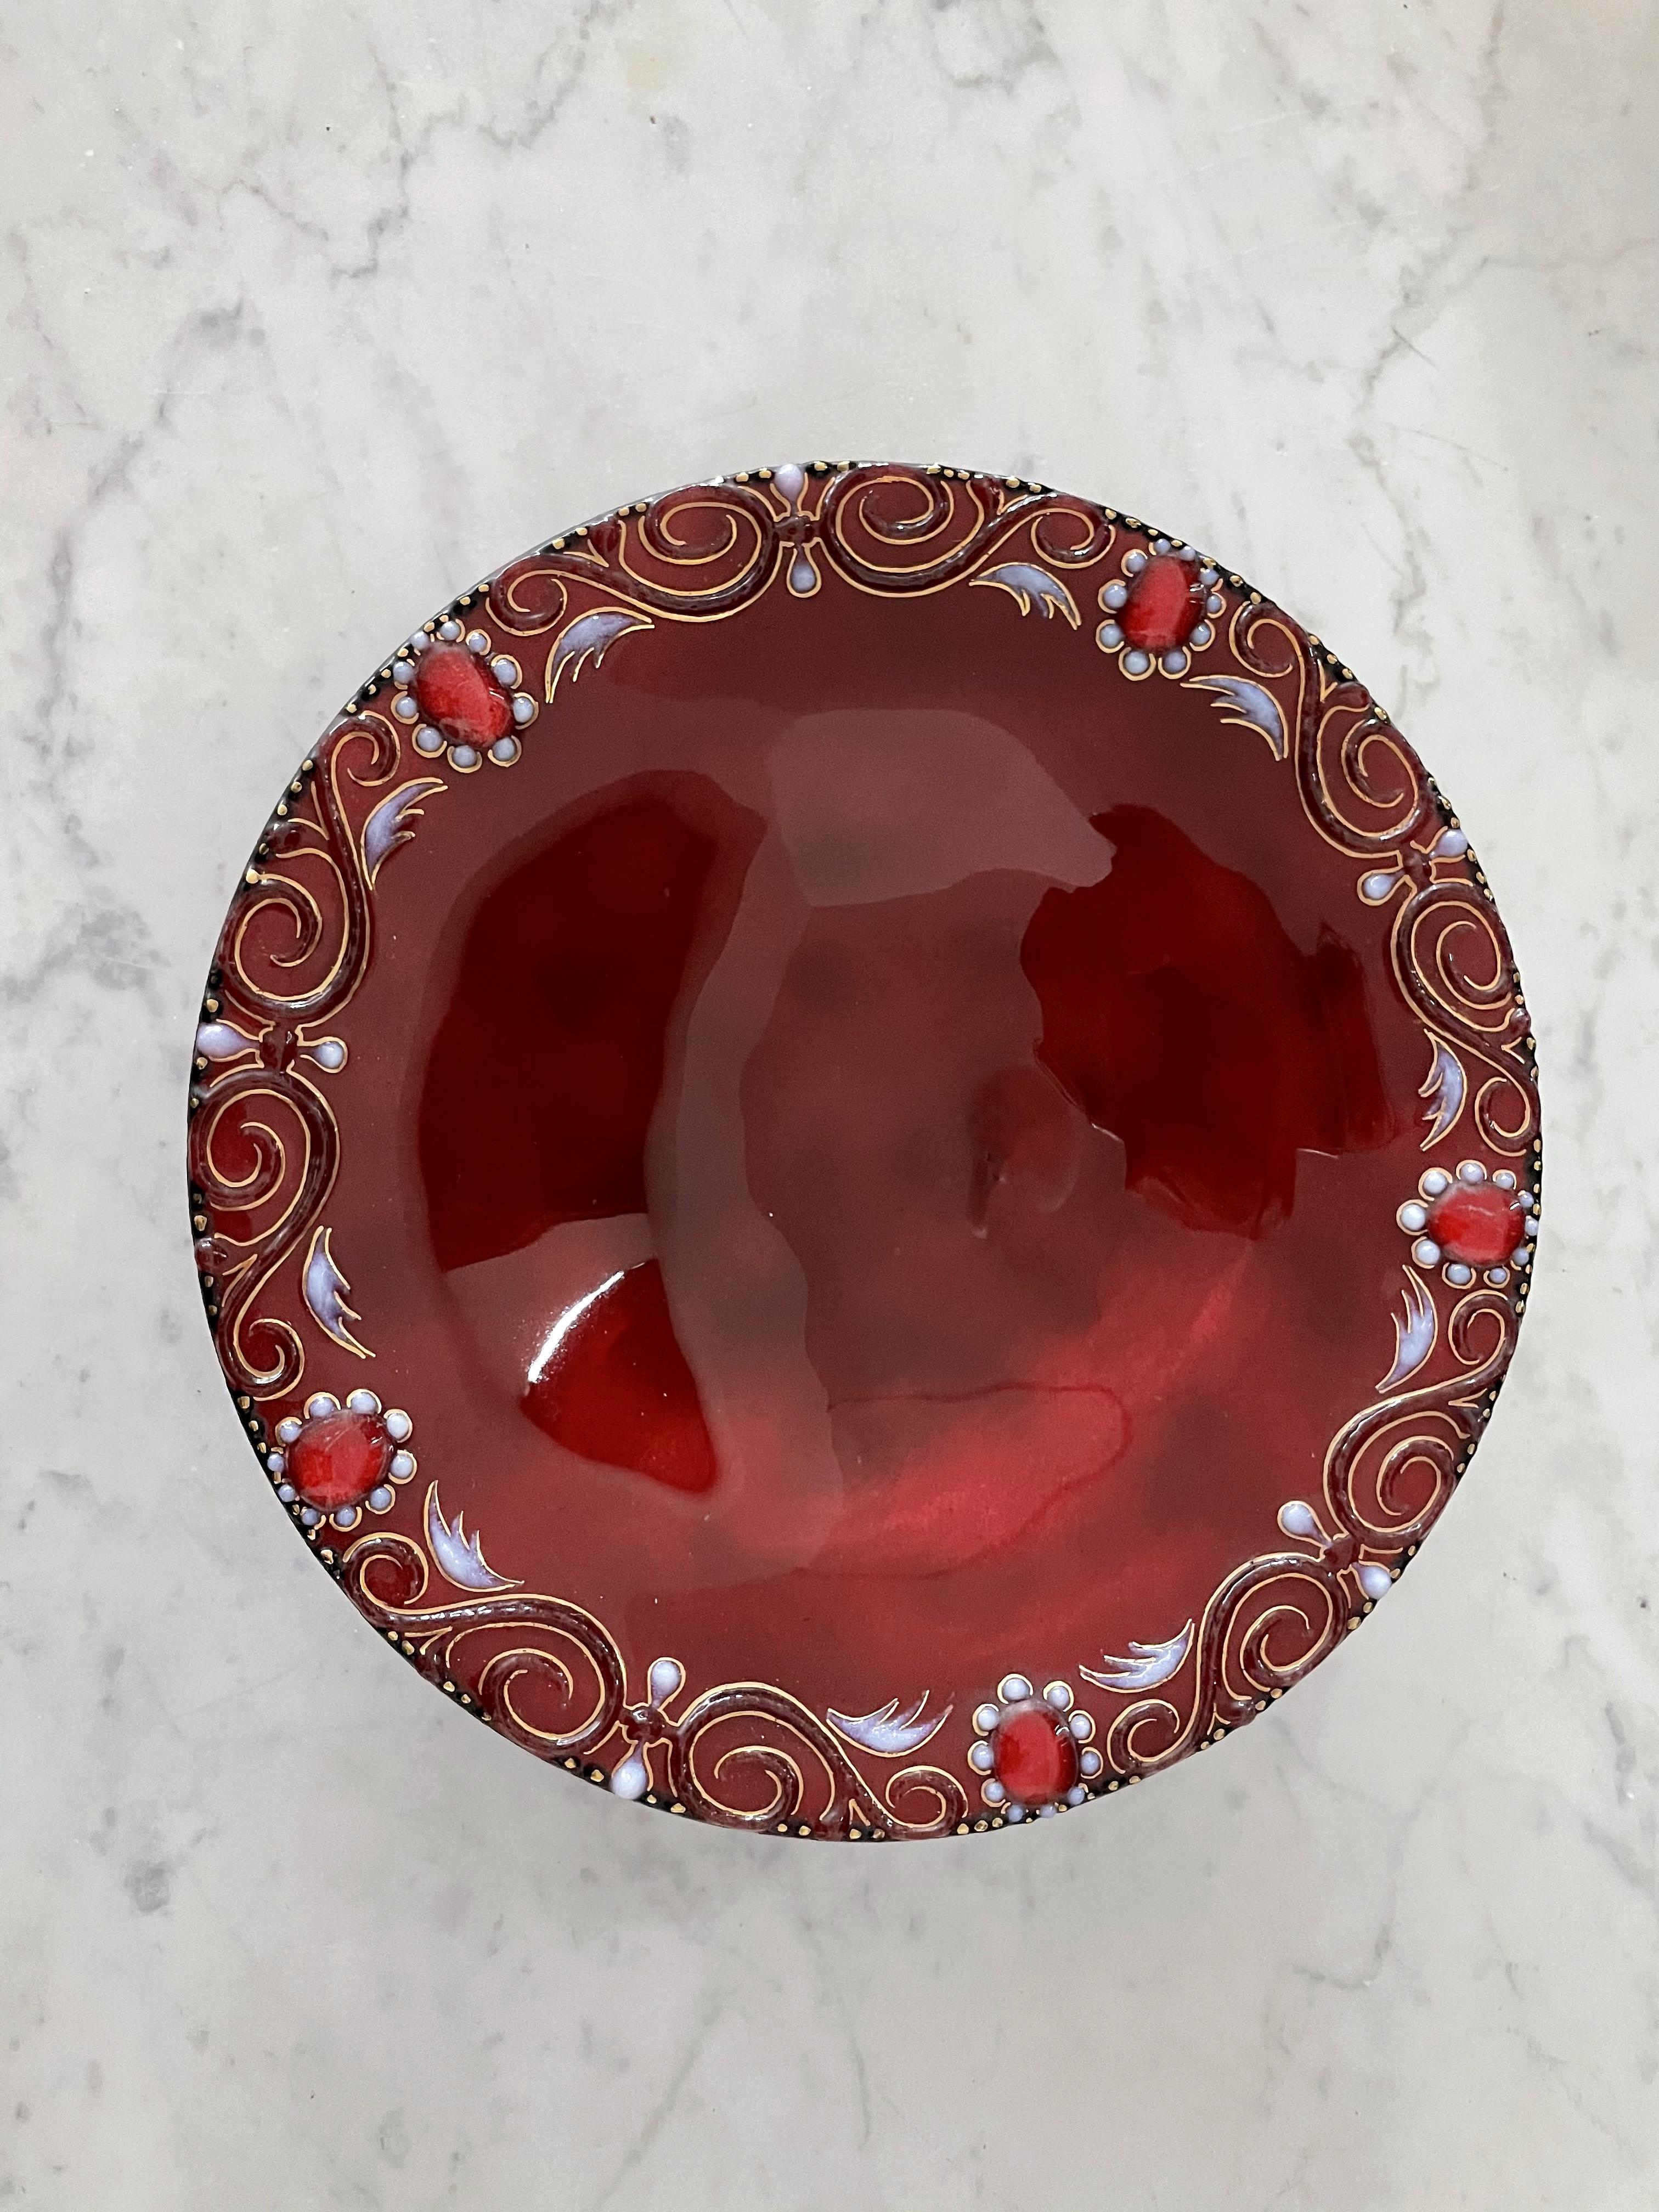 A mid-20th-century French Limoges enamel (the richest surviving corpus of medieval metalwork) centerpiece or decorative dish, signed Atelier Tochard Bonhomme in a burgundy red color with handpainted wing-like, flower and s-scroll details around.